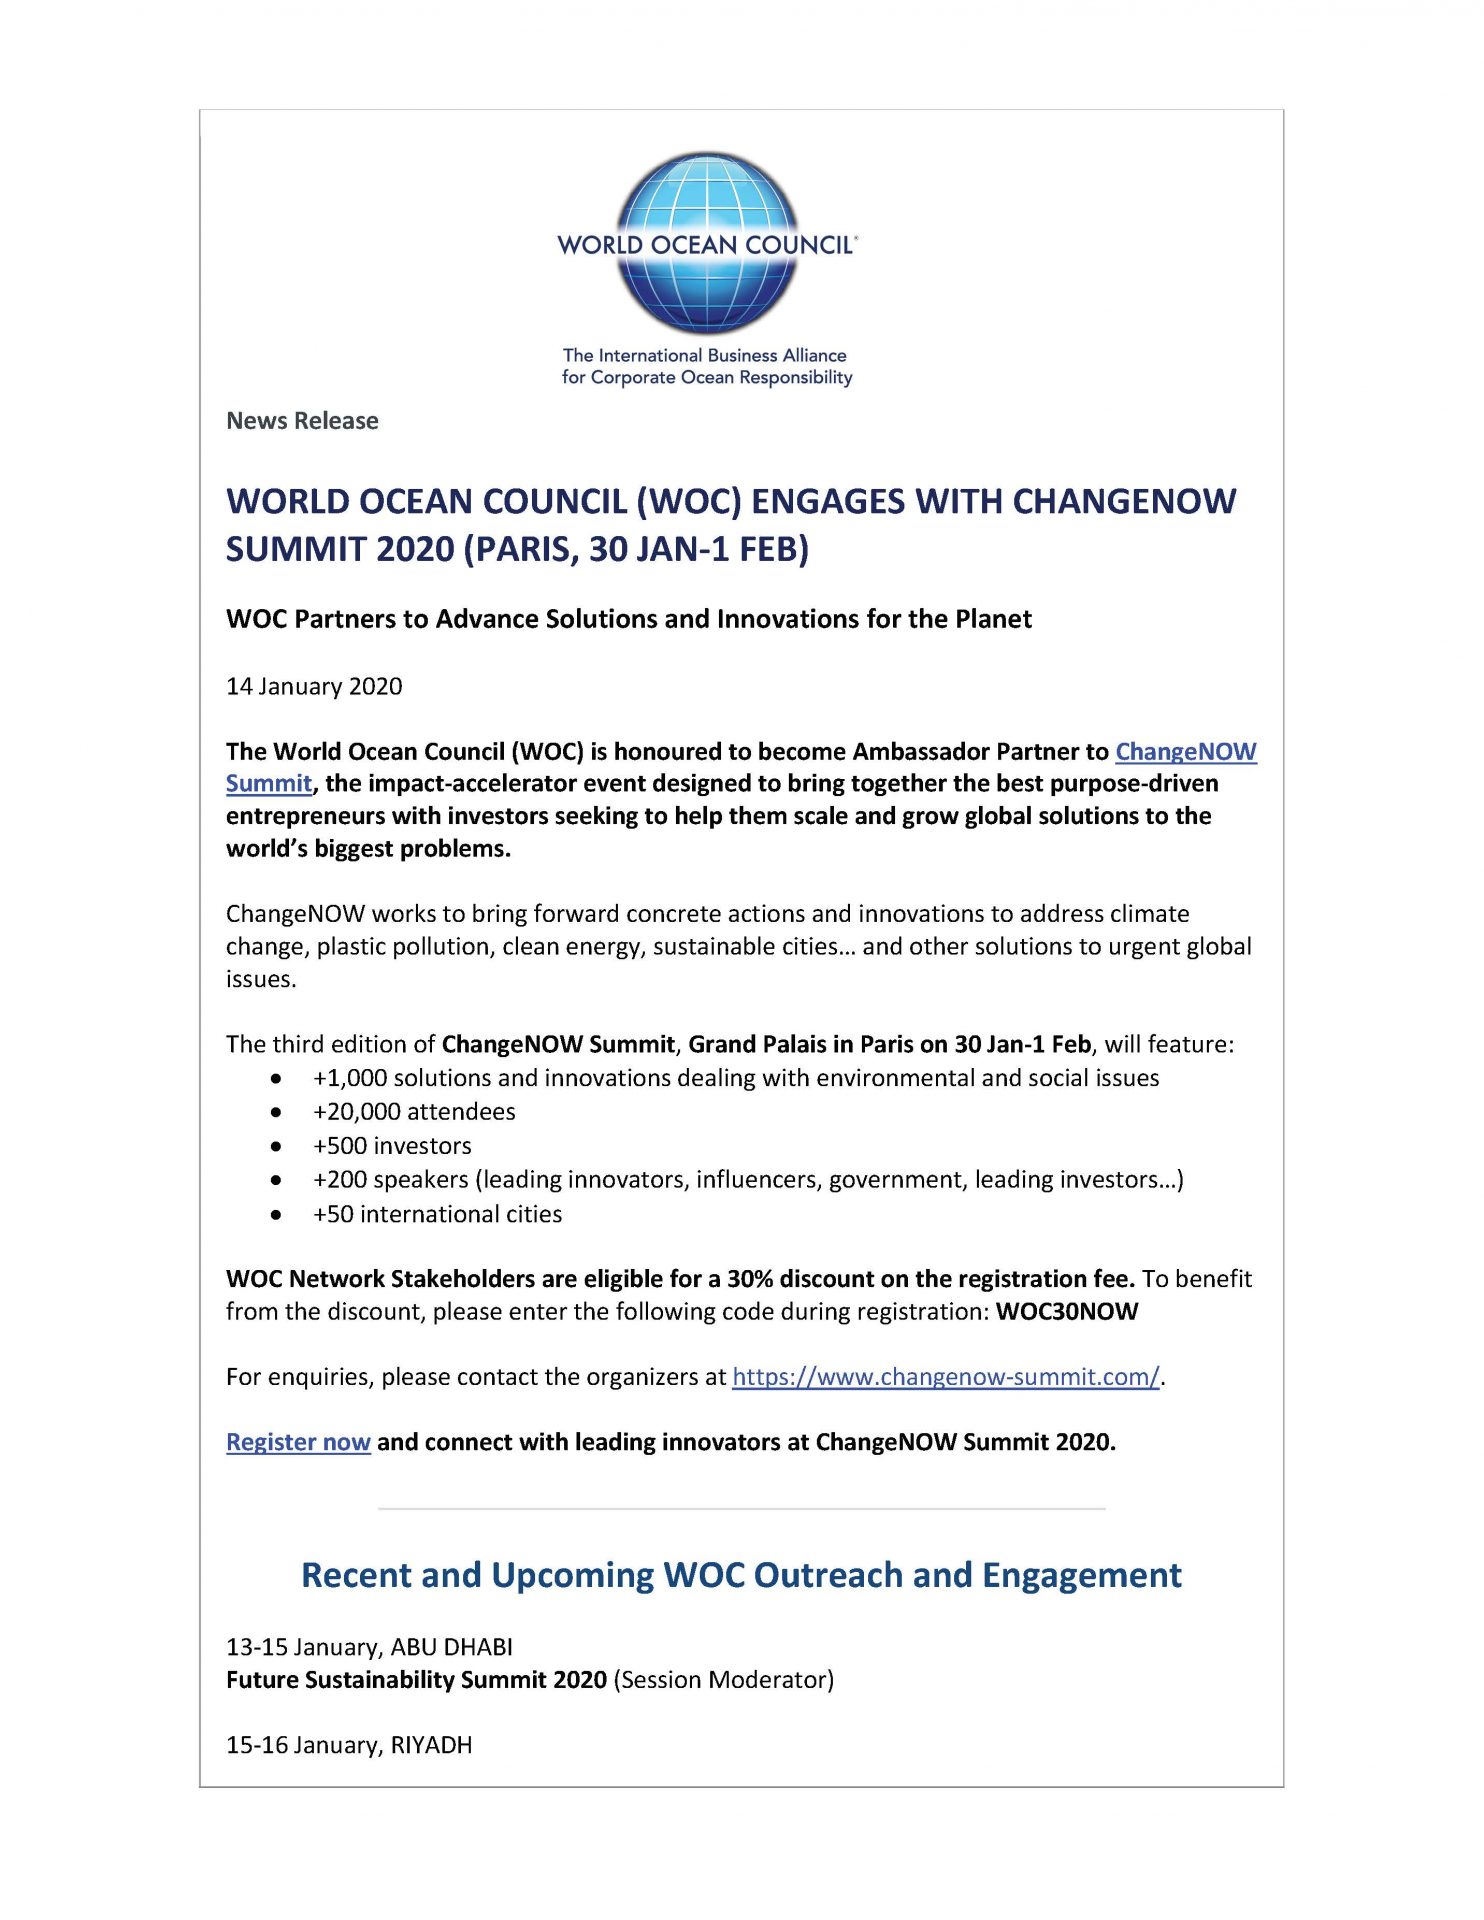 World Ocean Council (WOC) Engages with ChangeNOW Summit 2020 (Paris, 30 Jan-1 Feb) - 14 January 2020